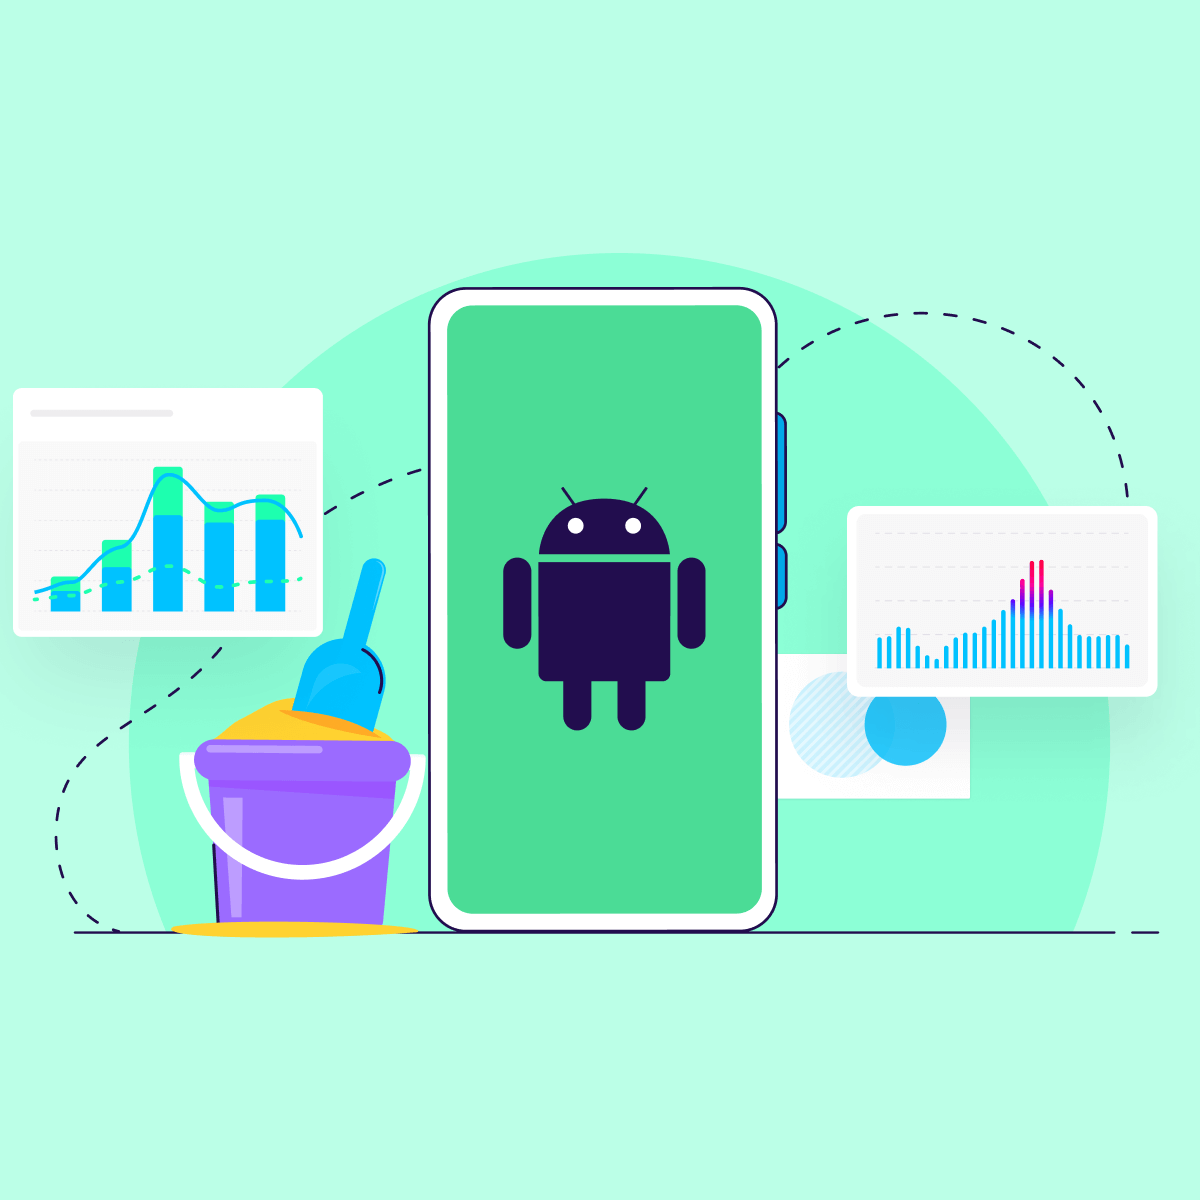 Android Privacy Sandbox is coming. What should marketers do next_ OG